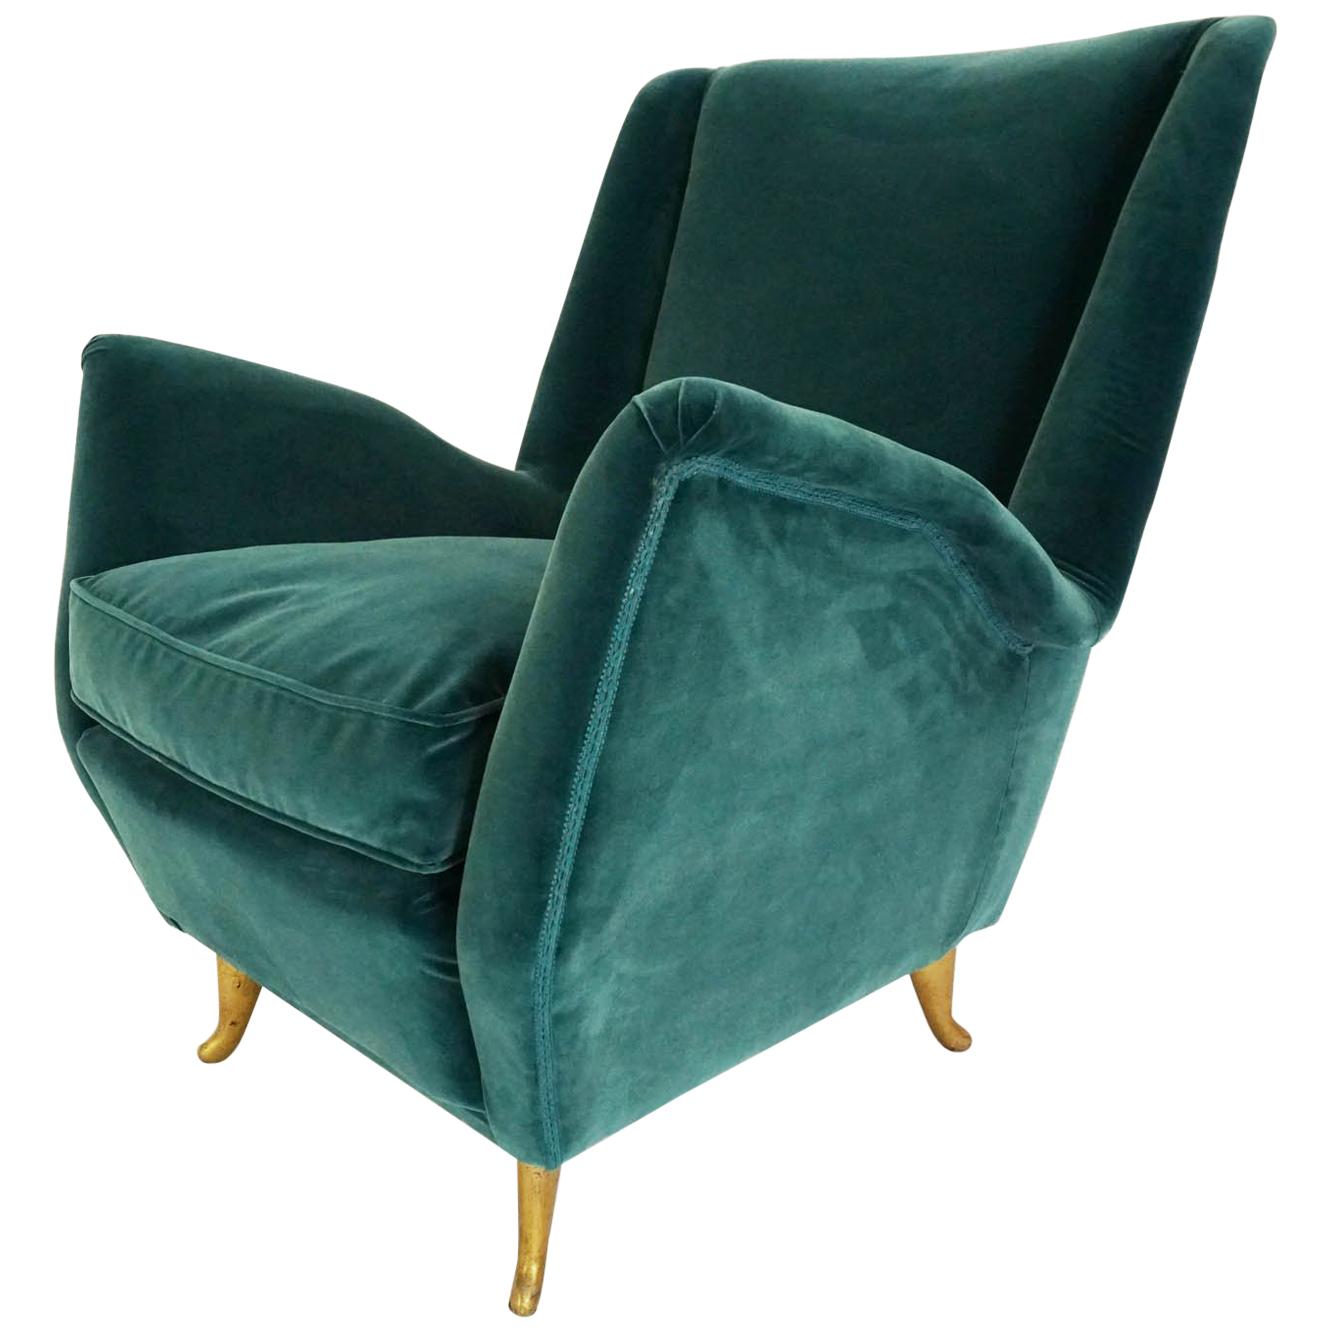 Elegant Deep Green Velvet for This Cozy Armchair Produced by ISA, Italy, 1959